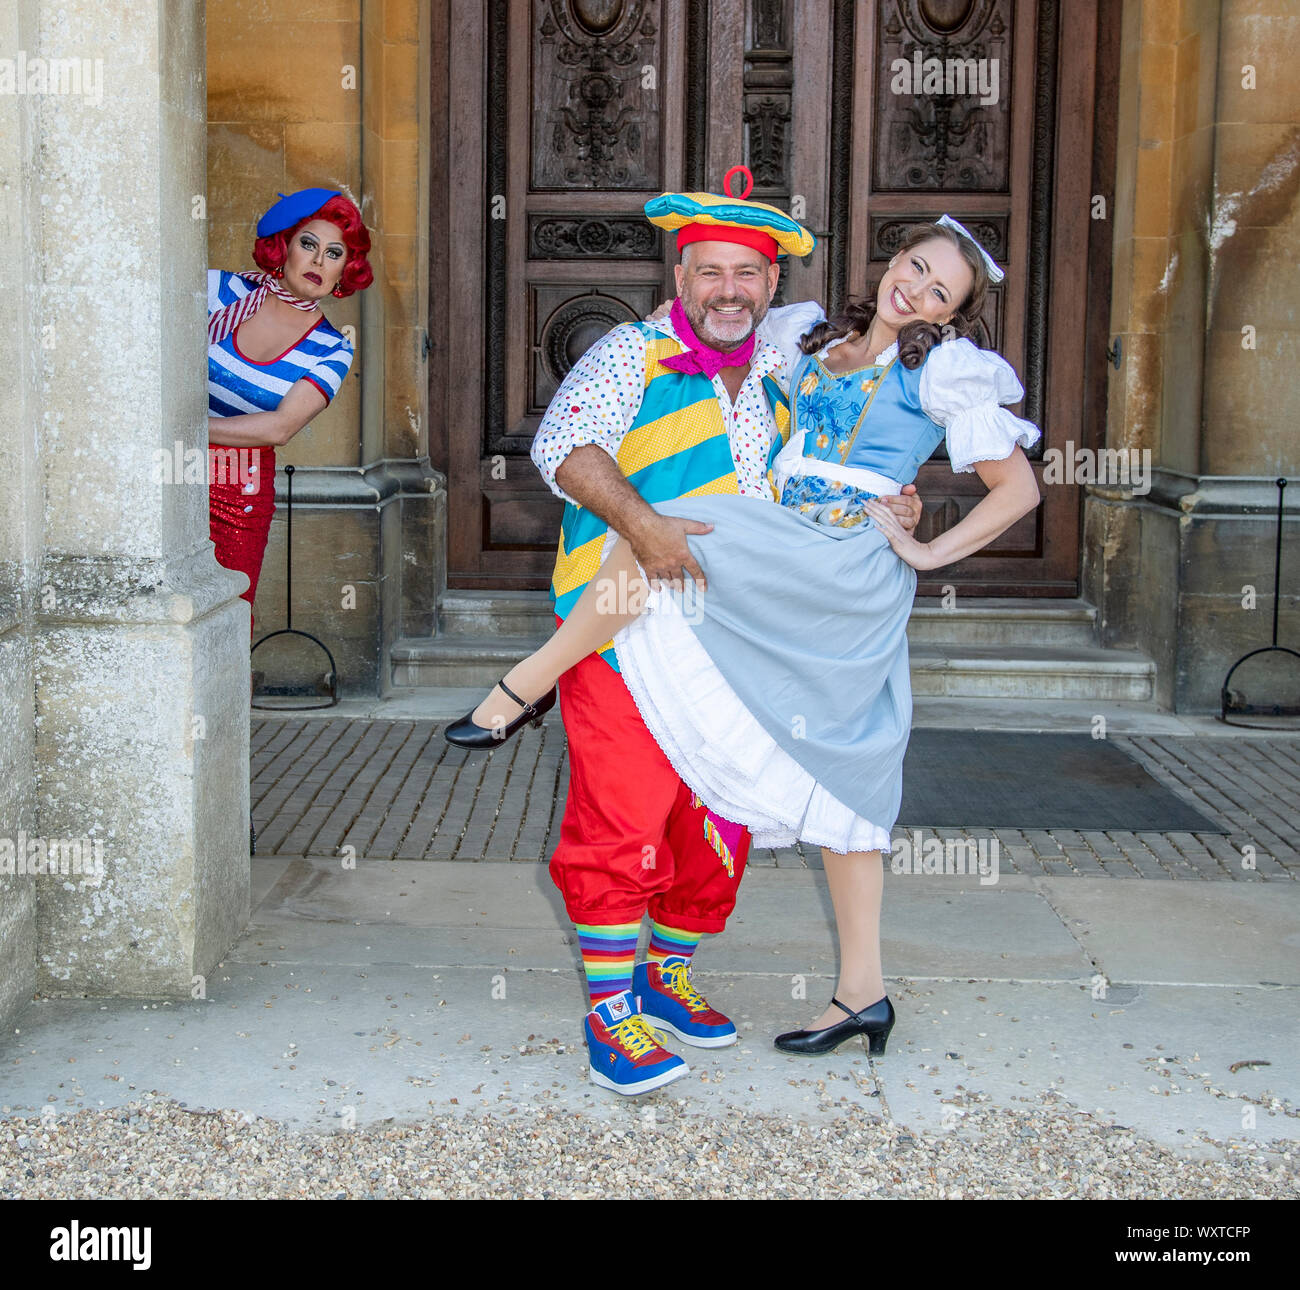 (L-R) La Voix (Polly Pot et Pan), Andy Collins (Louis Pot et Pan) and Amelia Adams-Pearce (Belle) attend the Beauty & The Beast pantomime press launch at Waddesdon Manor, Aylesbury. Stock Photo